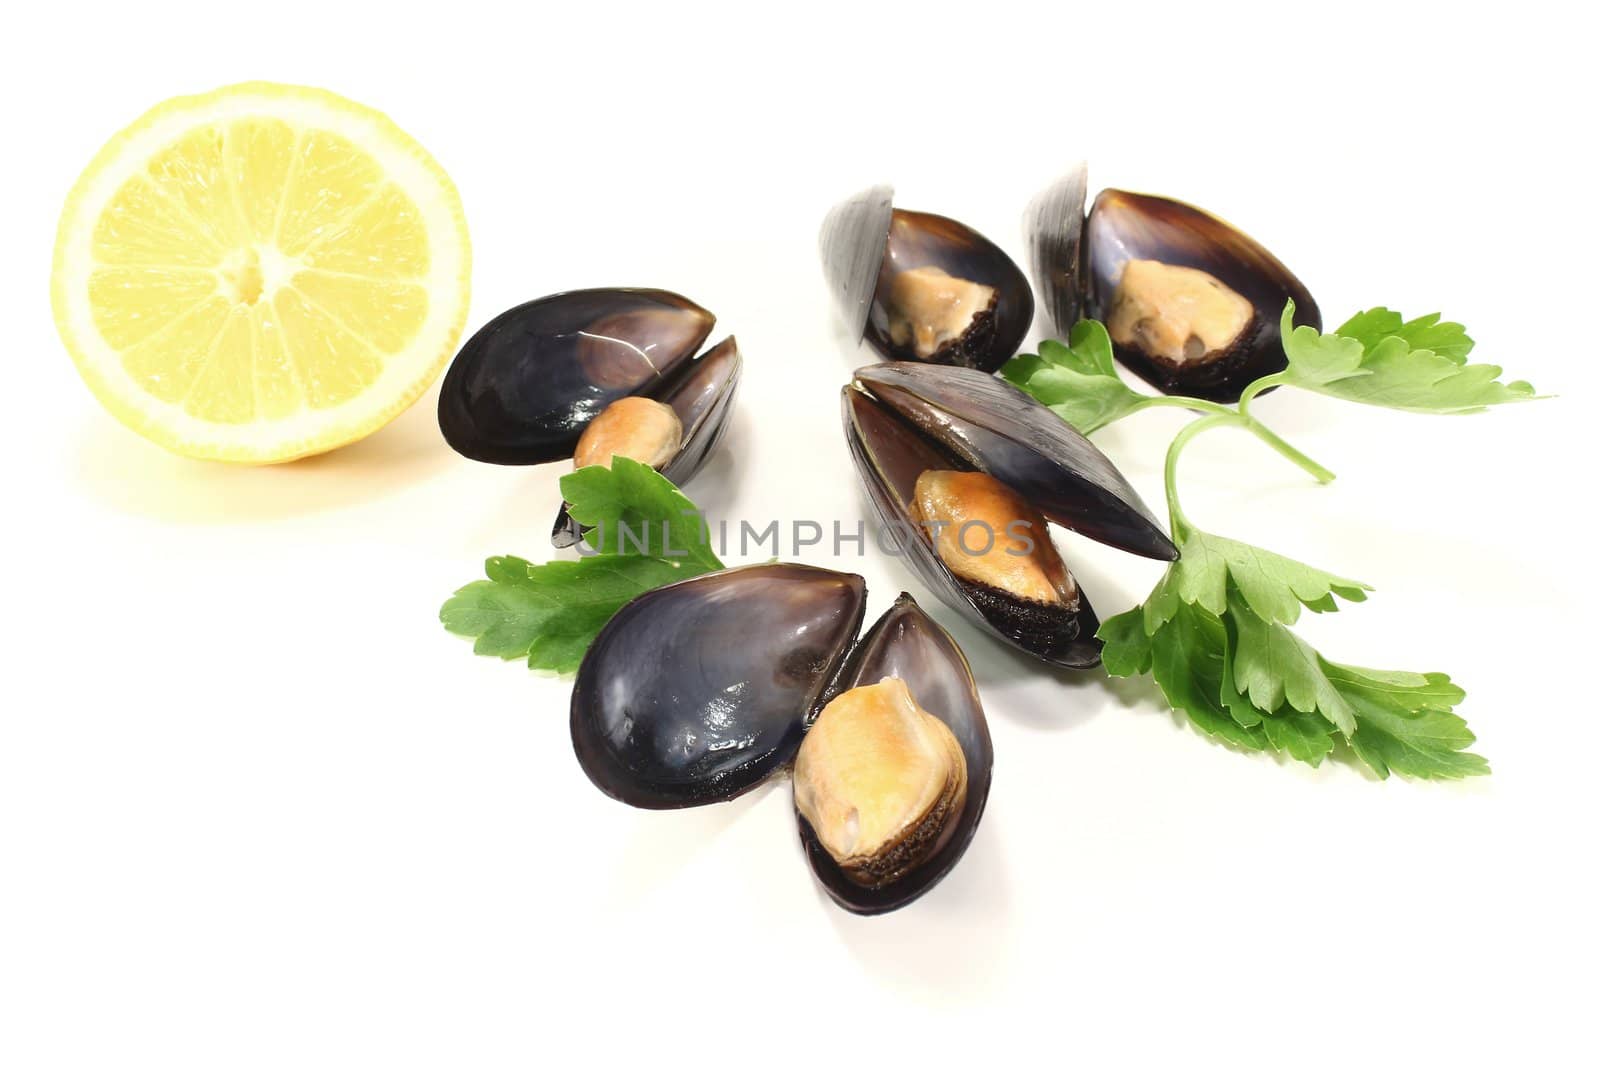 Mussels with parsley and lemon on a white background